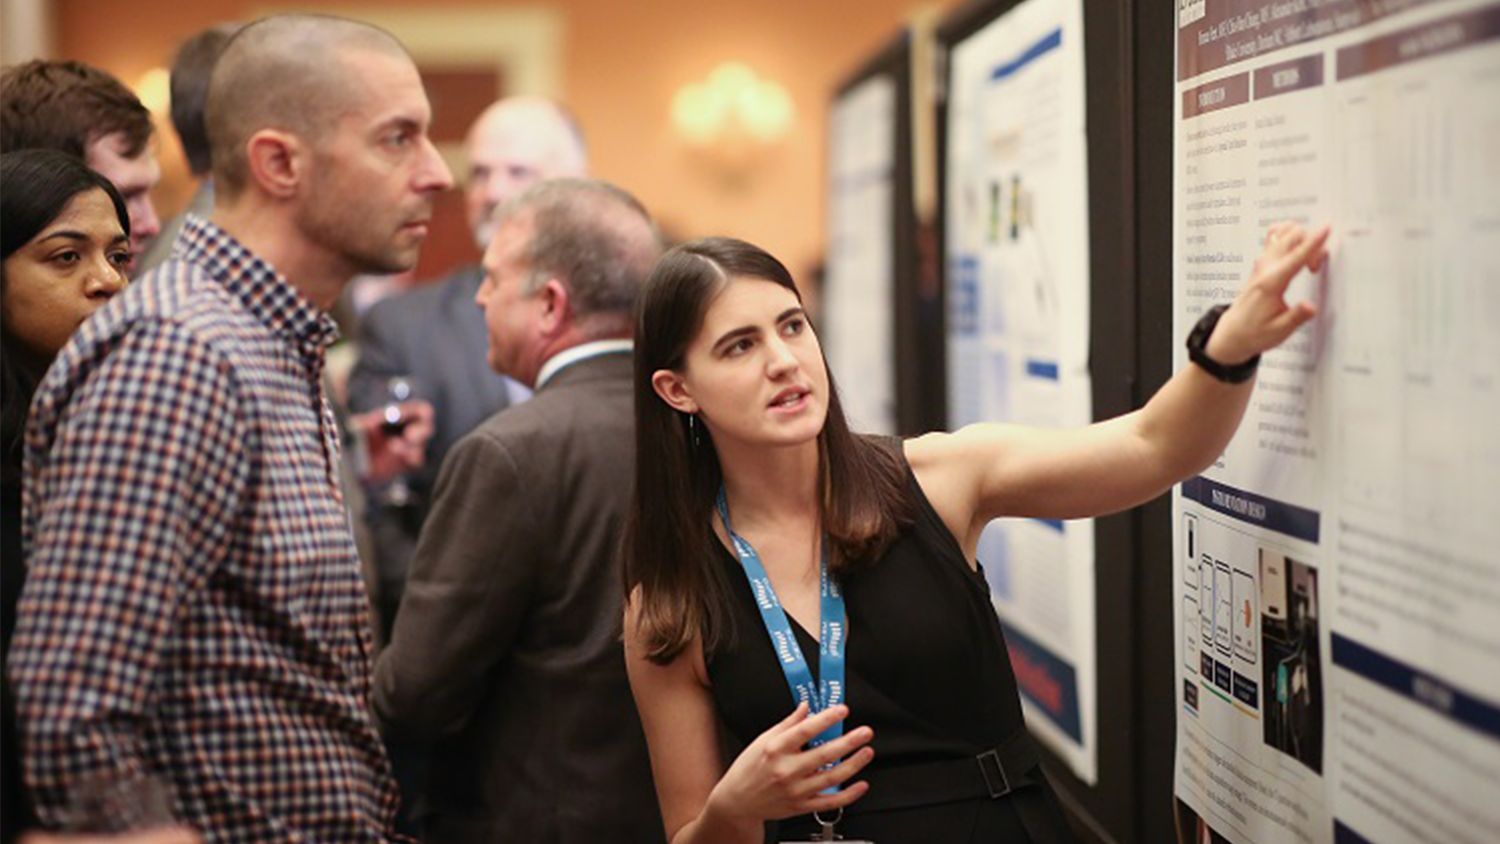 A student presents research on a poster at a conference